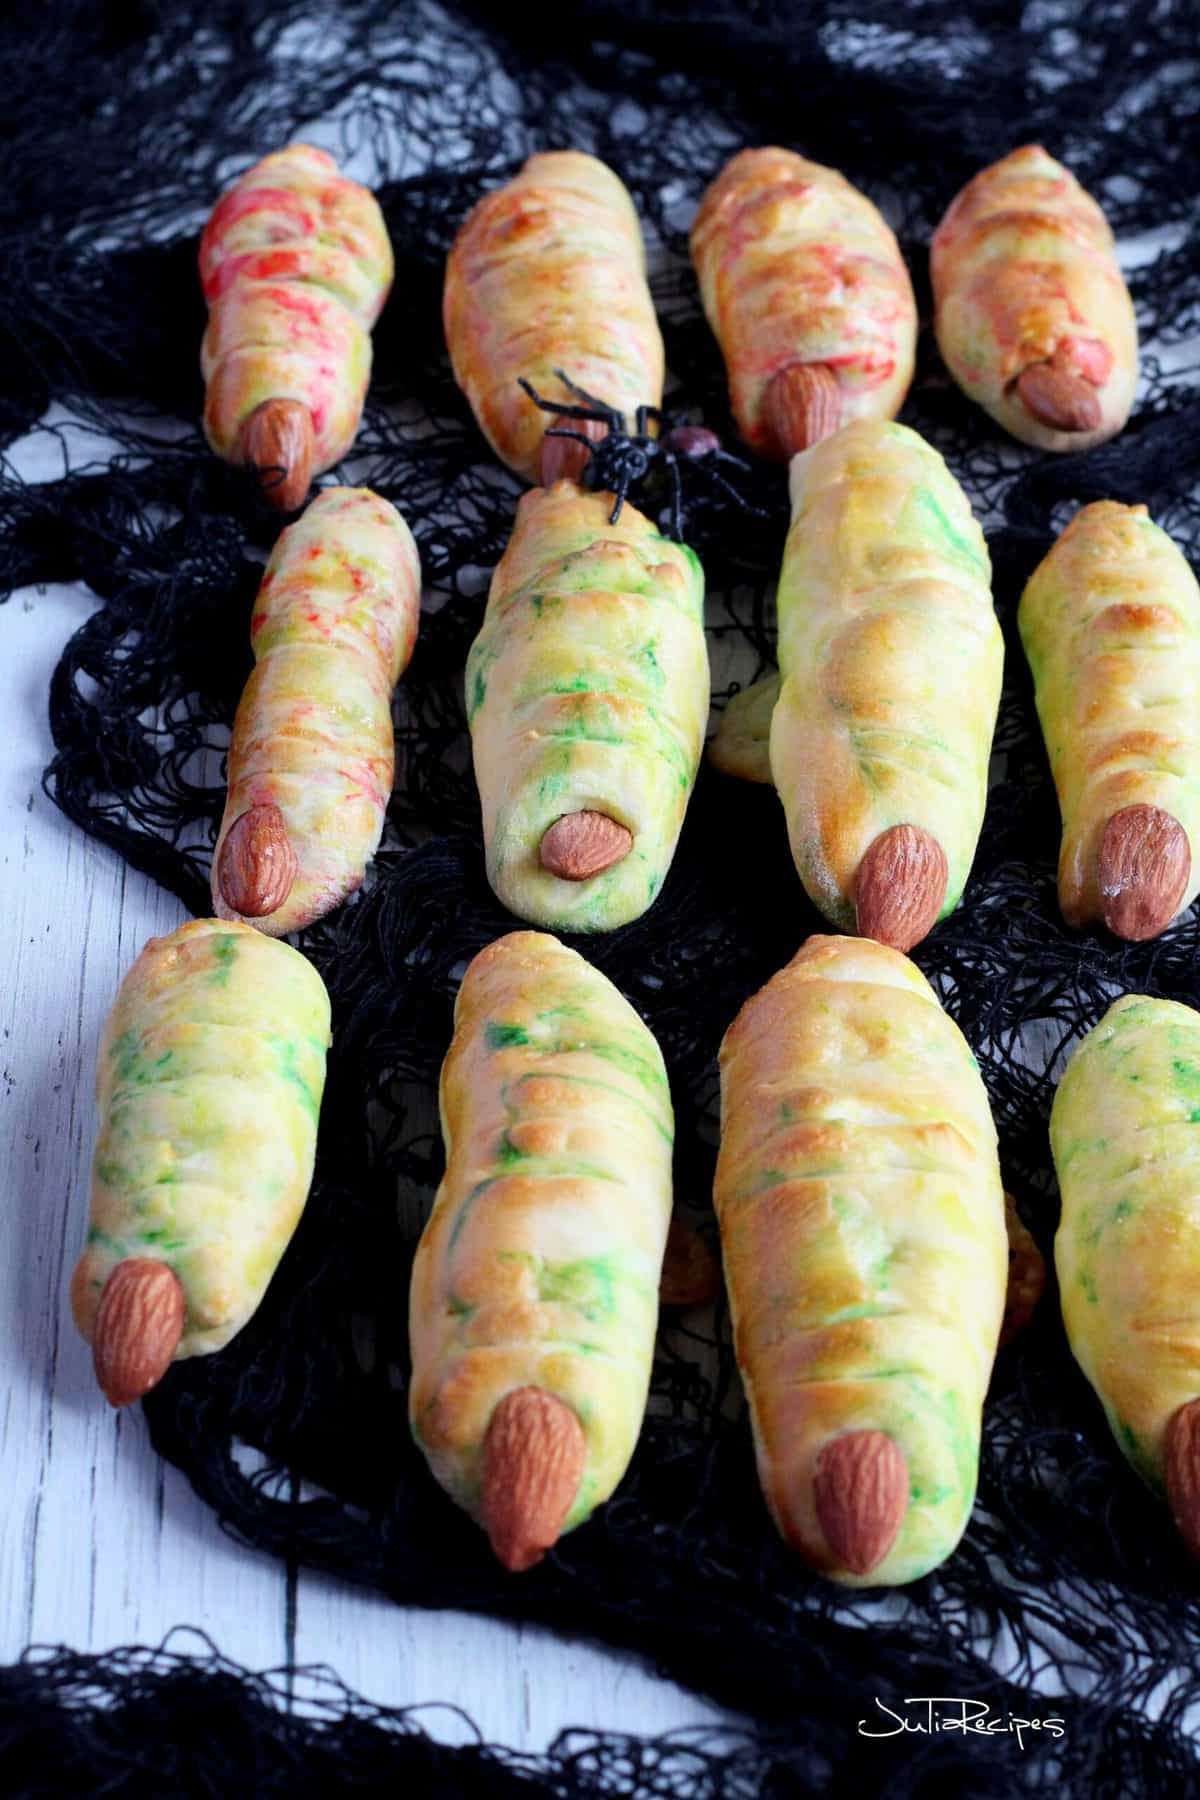 Pizza dough shaped to look like witches fingers for an appetizer.